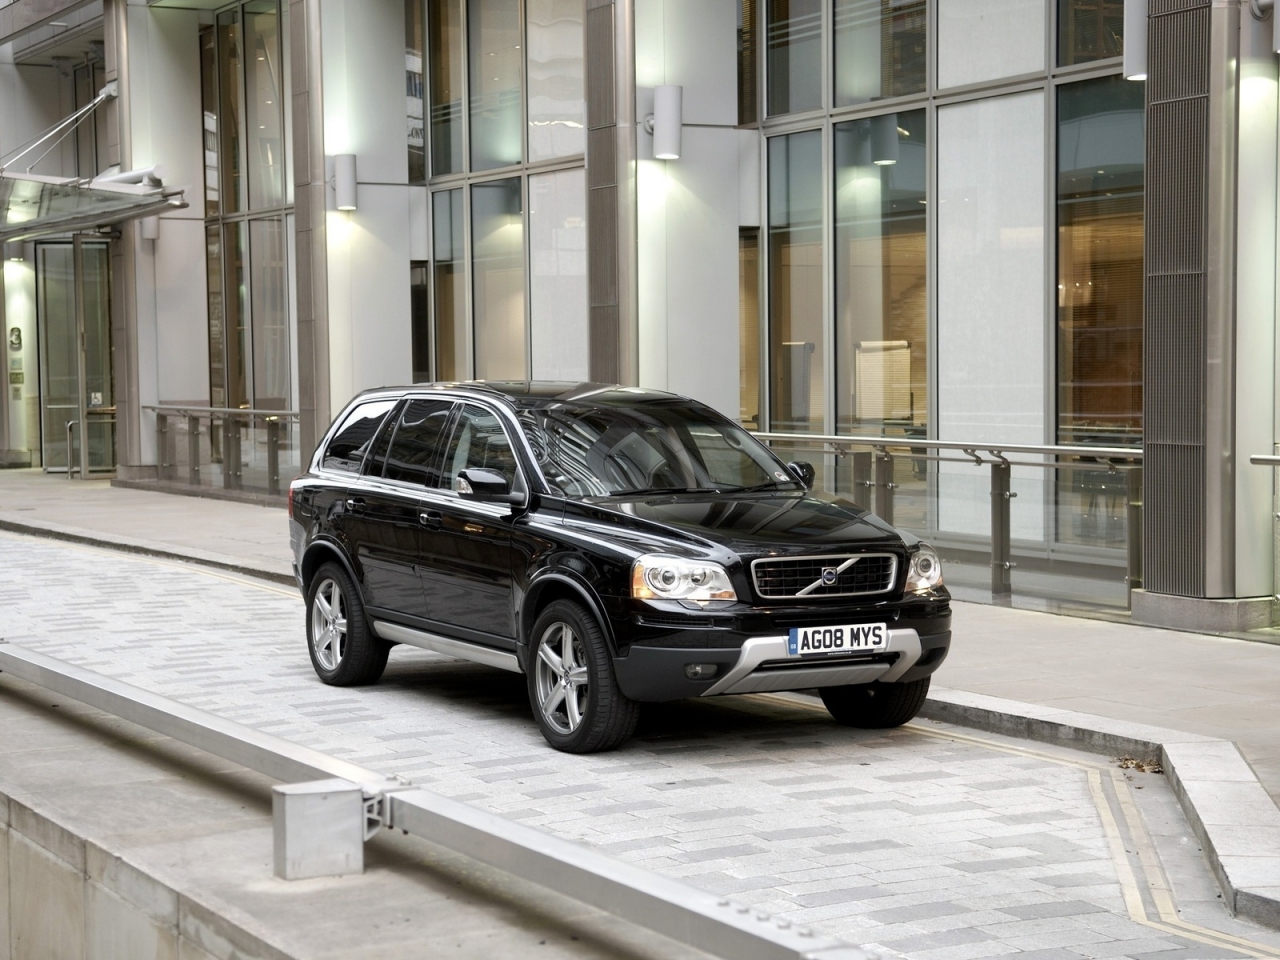 Volvo XC 90 for 1280 x 960 resolution